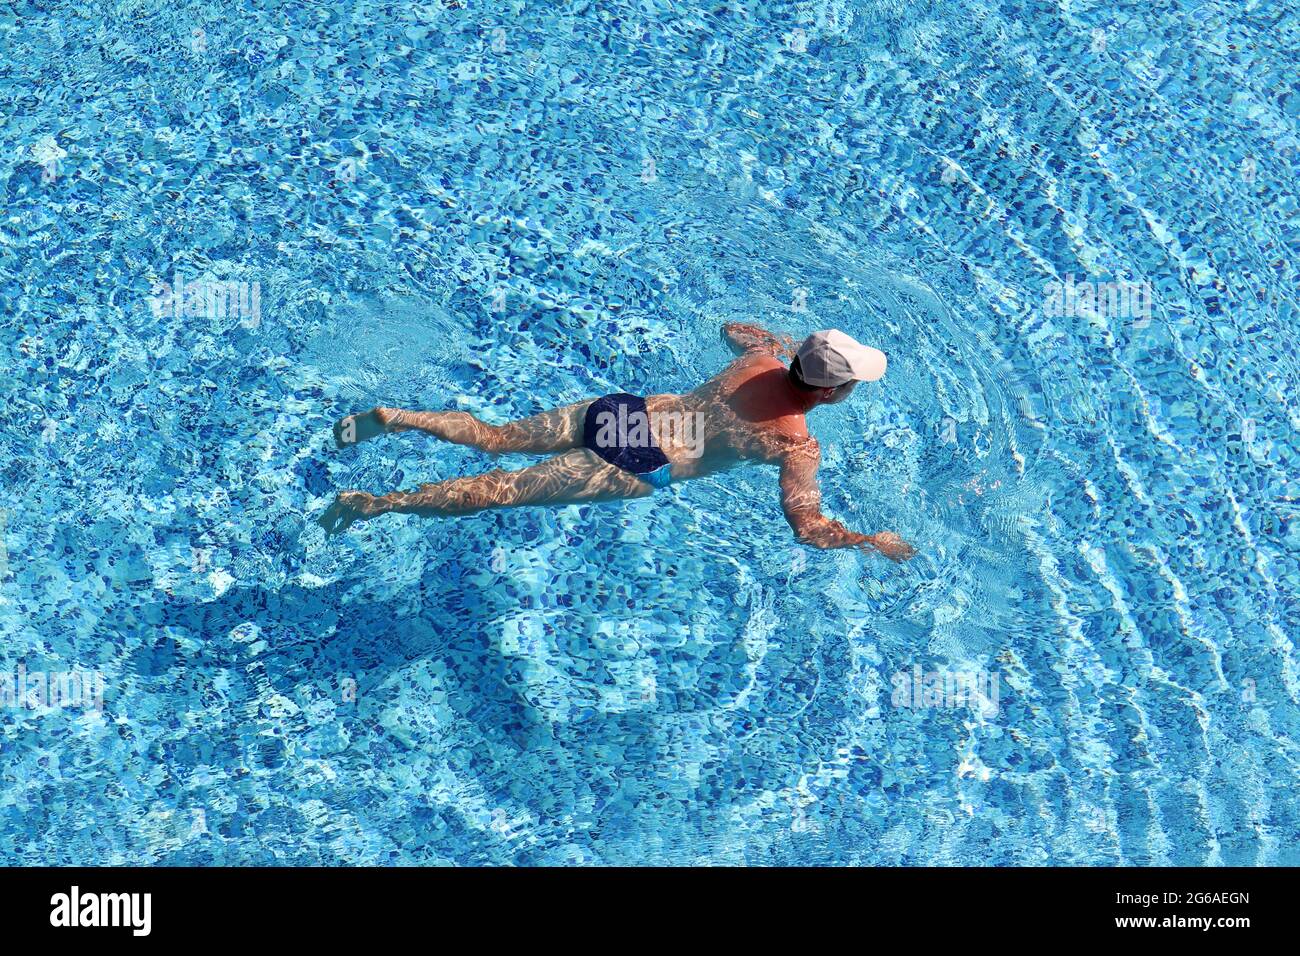 Man swimming in a pool, aerial view. Summer vacation, water sports Stock Photo